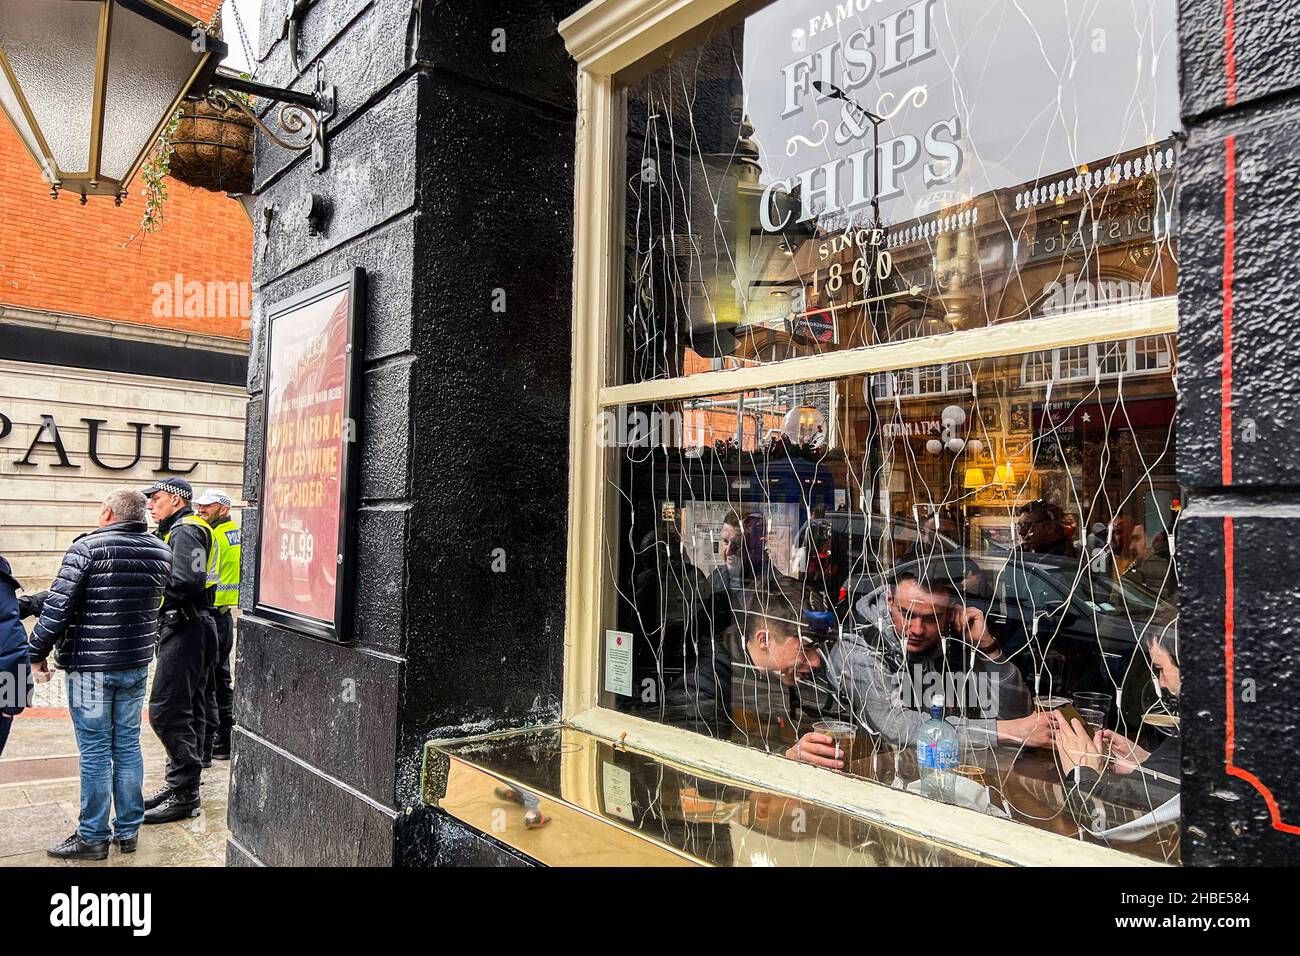 London, UK. 11th Dec, 2021. Dec. 11, 2021 A pub on Fulham Road in London. According to the British Beer & Pub Association almost one in four pubs have closed since 2000 and news reports say the UK has lost more than 3,000 pubs and bars since March 2020 when the COVID pandemic began. (Photo by Samuel Rigelhaupt/Sipa USA) Credit: Sipa USA/Alamy Live News Stock Photo